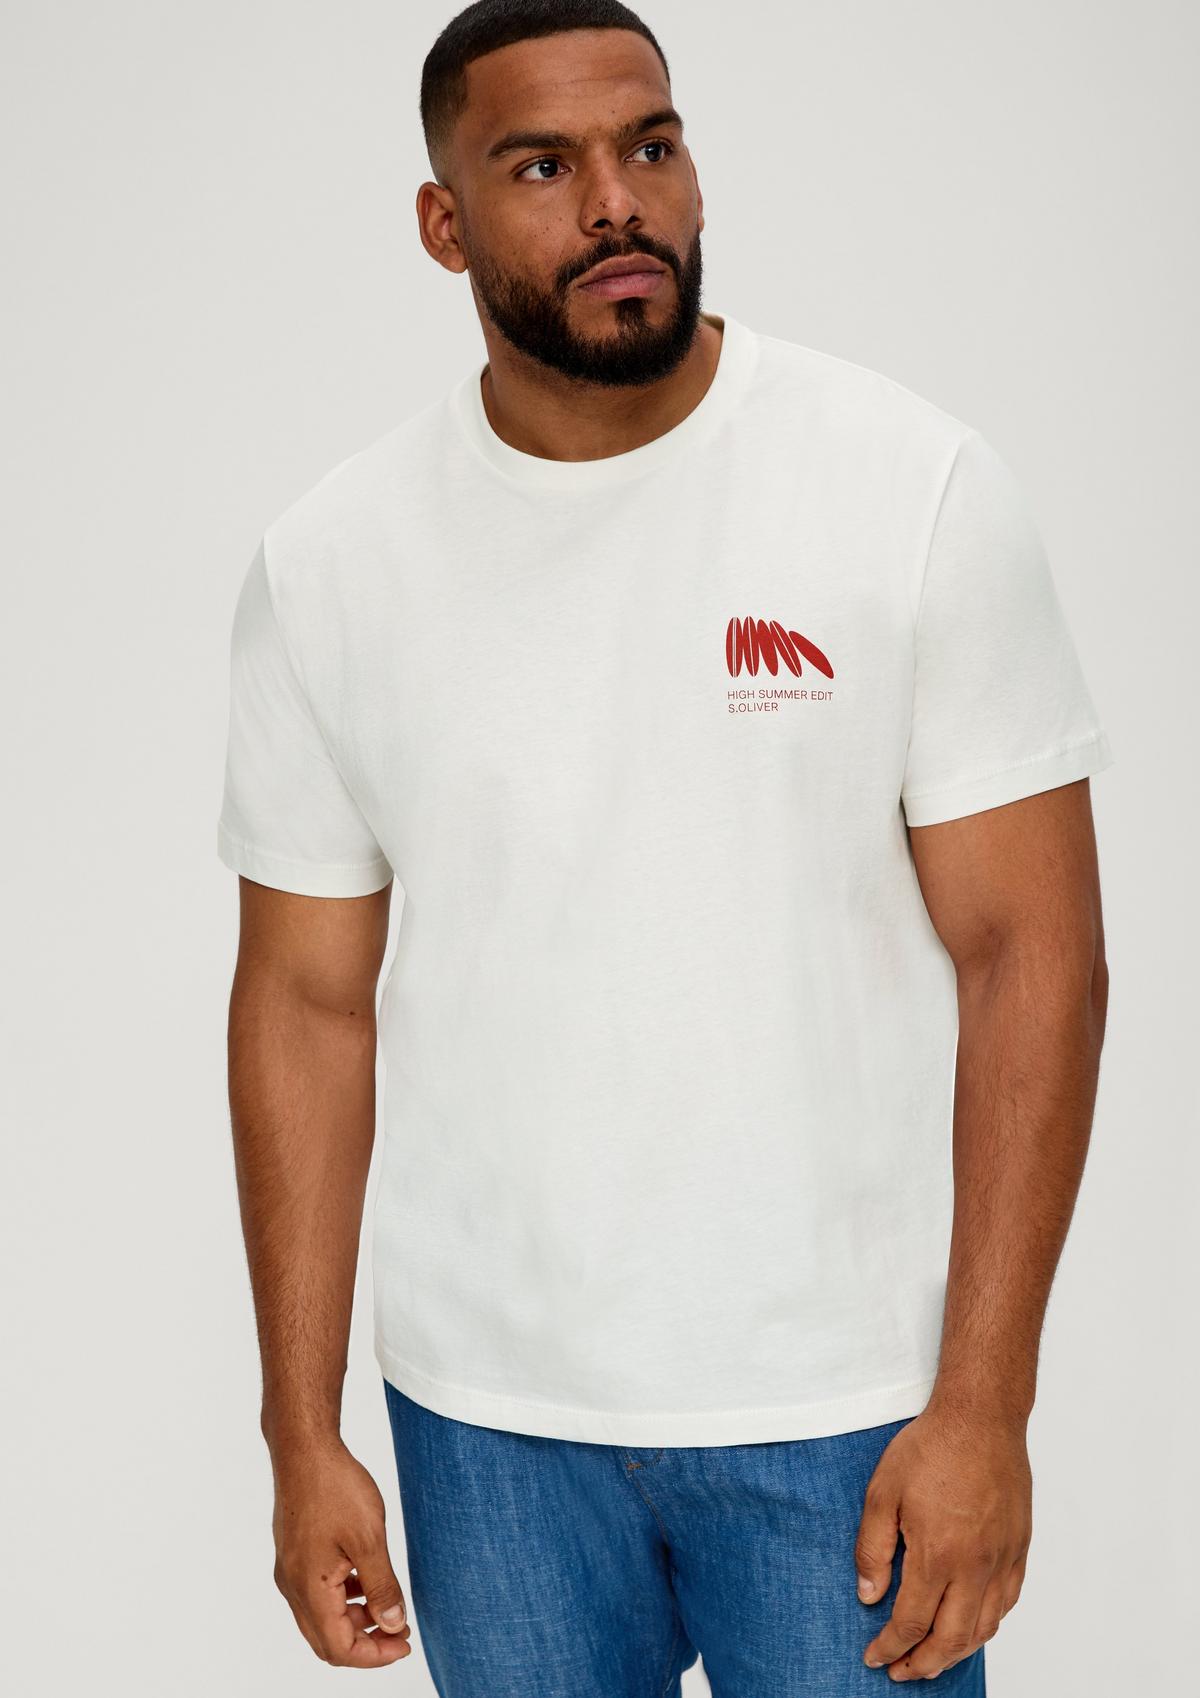 Cotton T-shirt with a front white print 